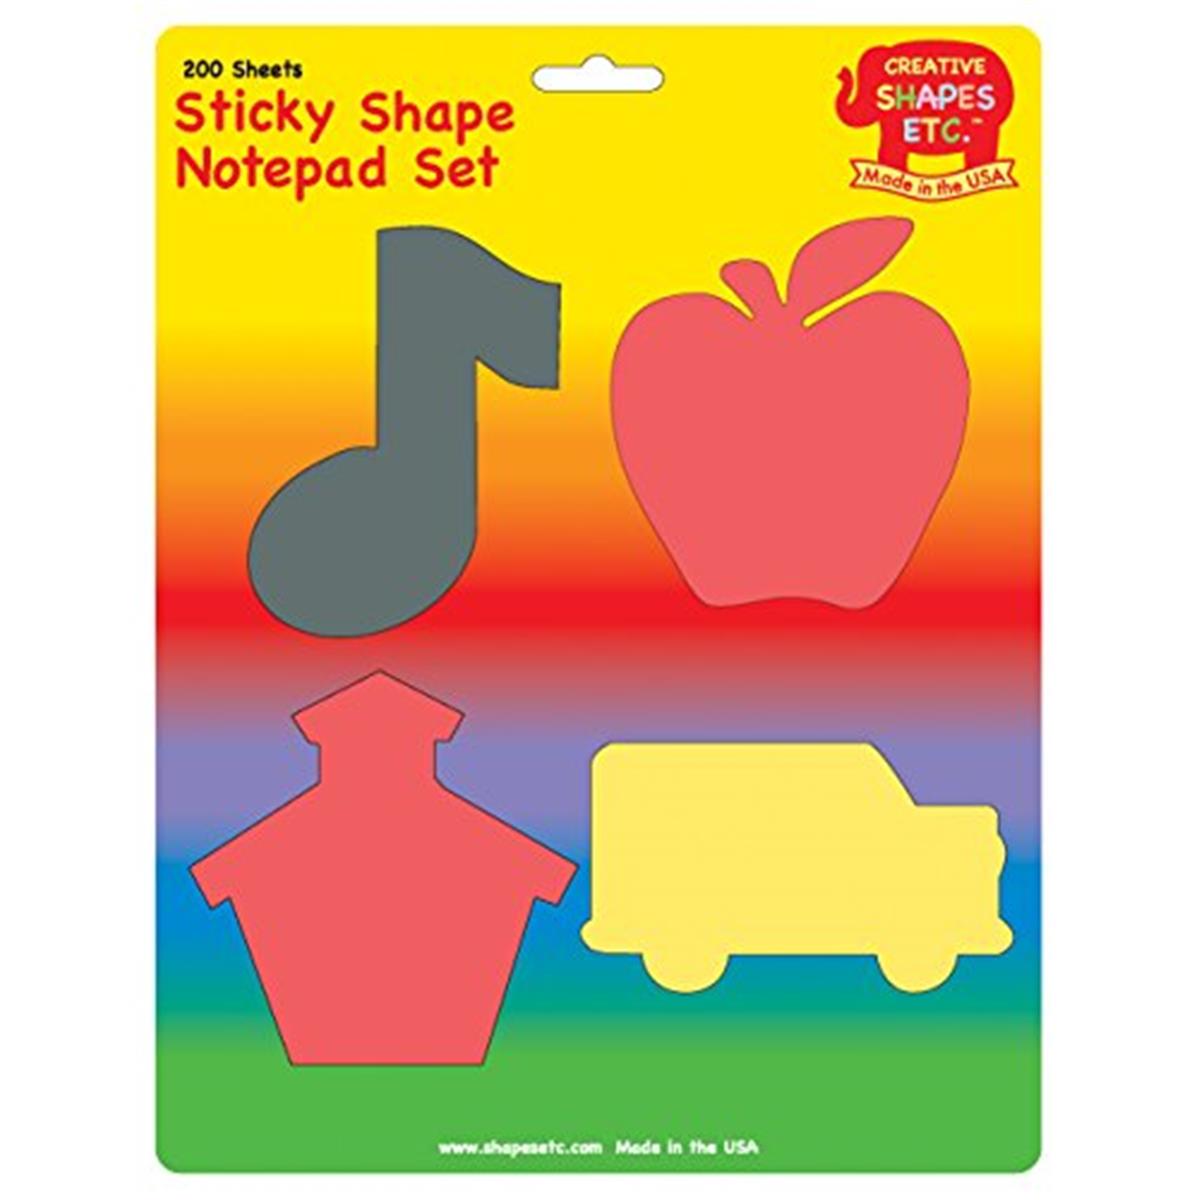 Se-0987 4.5 X 4 In. Color Sticky Shape Notepad Set, Back To School - 200 Sheets Per Pack